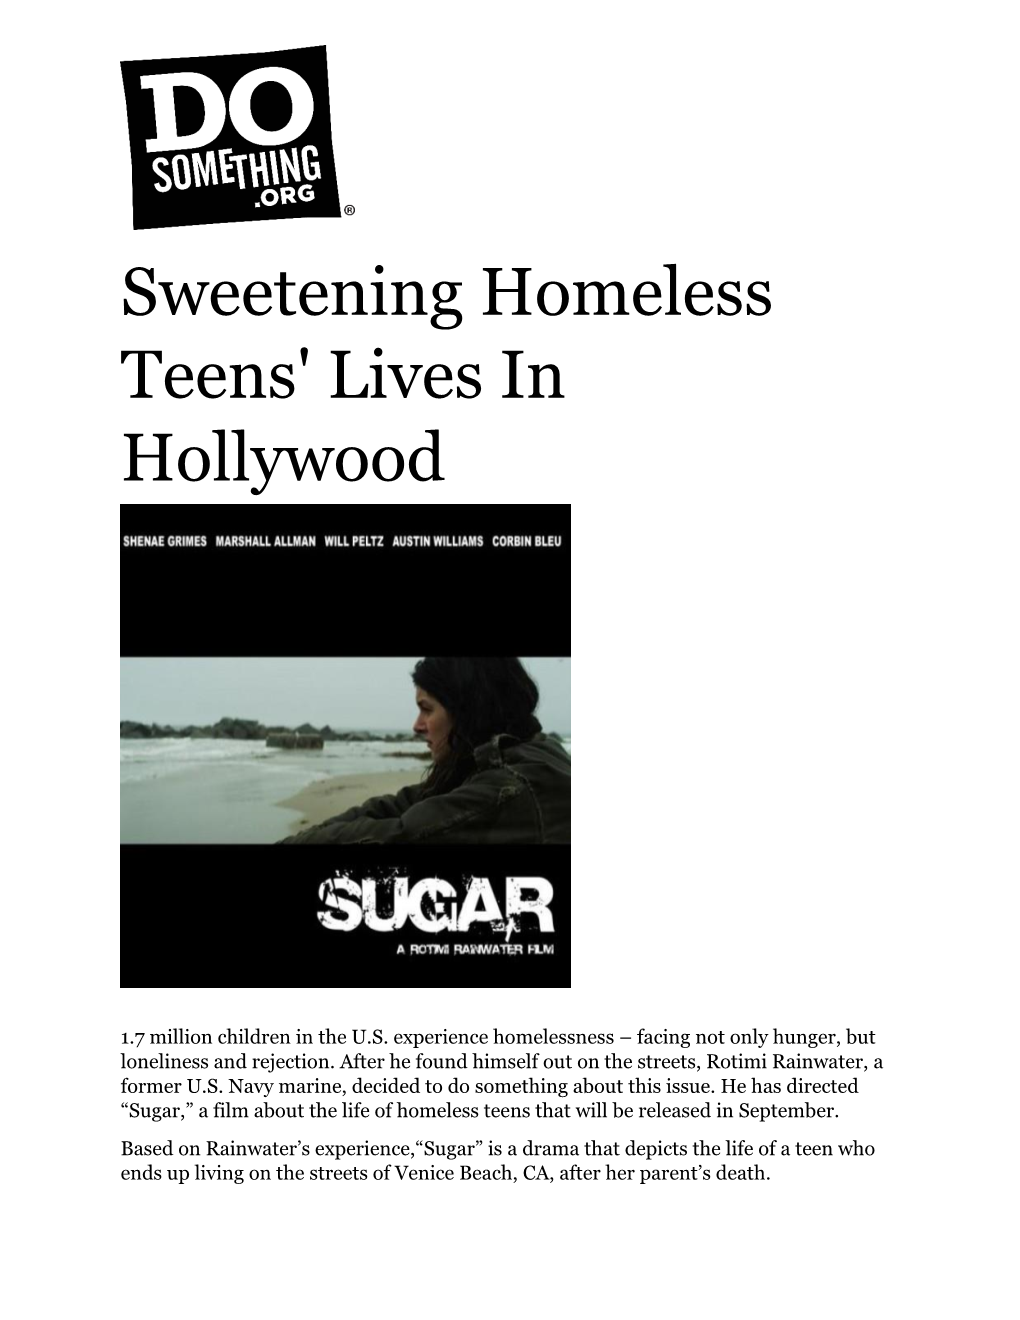 Sweetening Homeless Teens' Lives in Hollywood